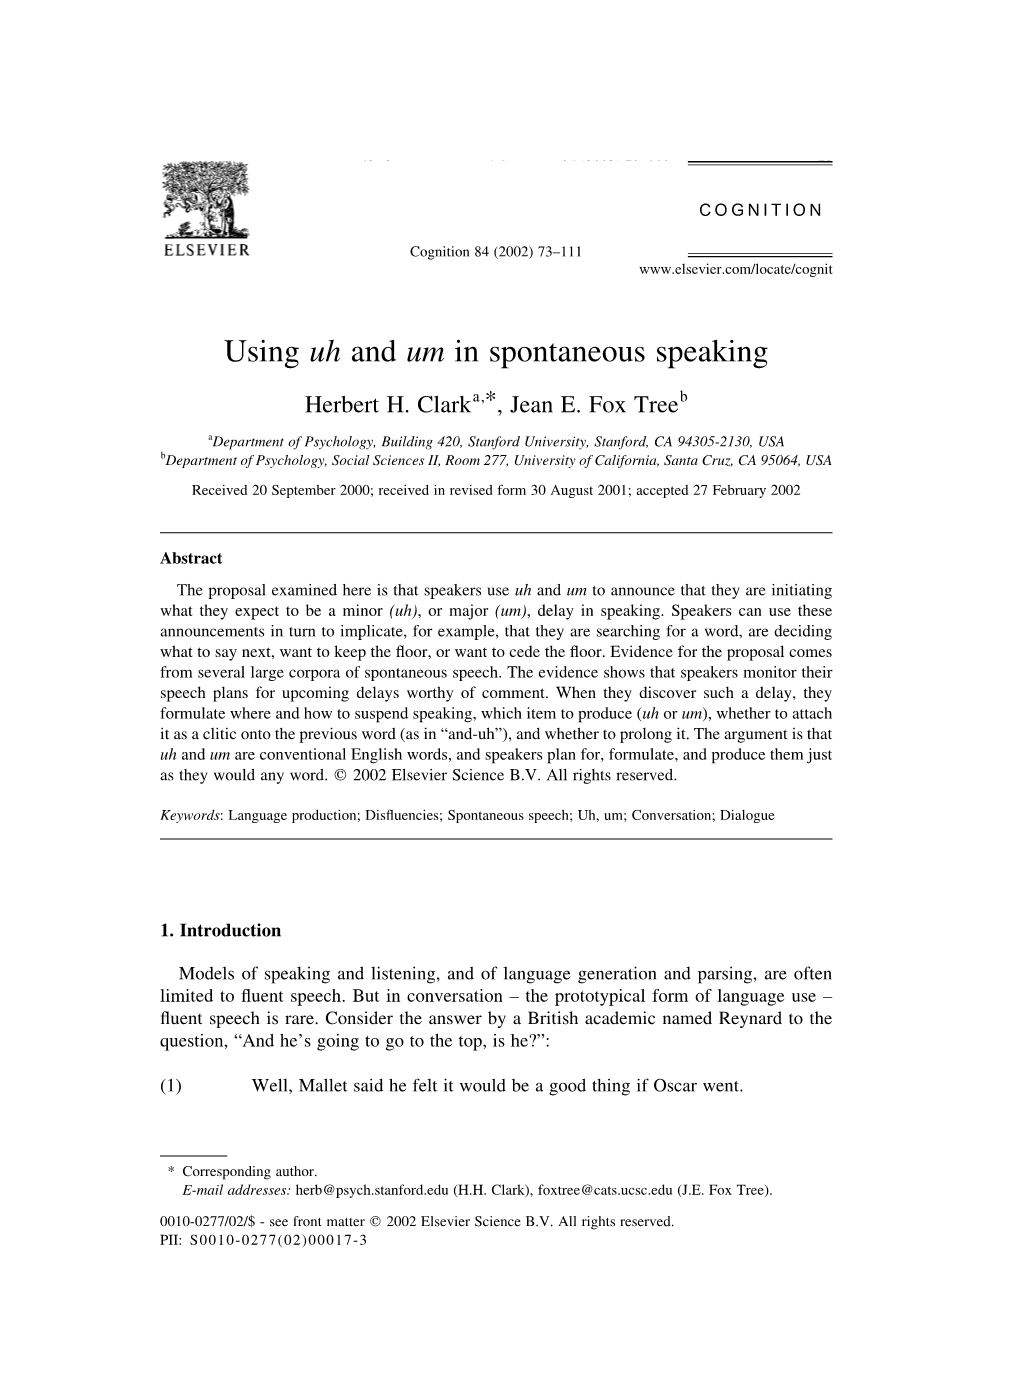 Using Uh and Um in Spontaneous Speaking